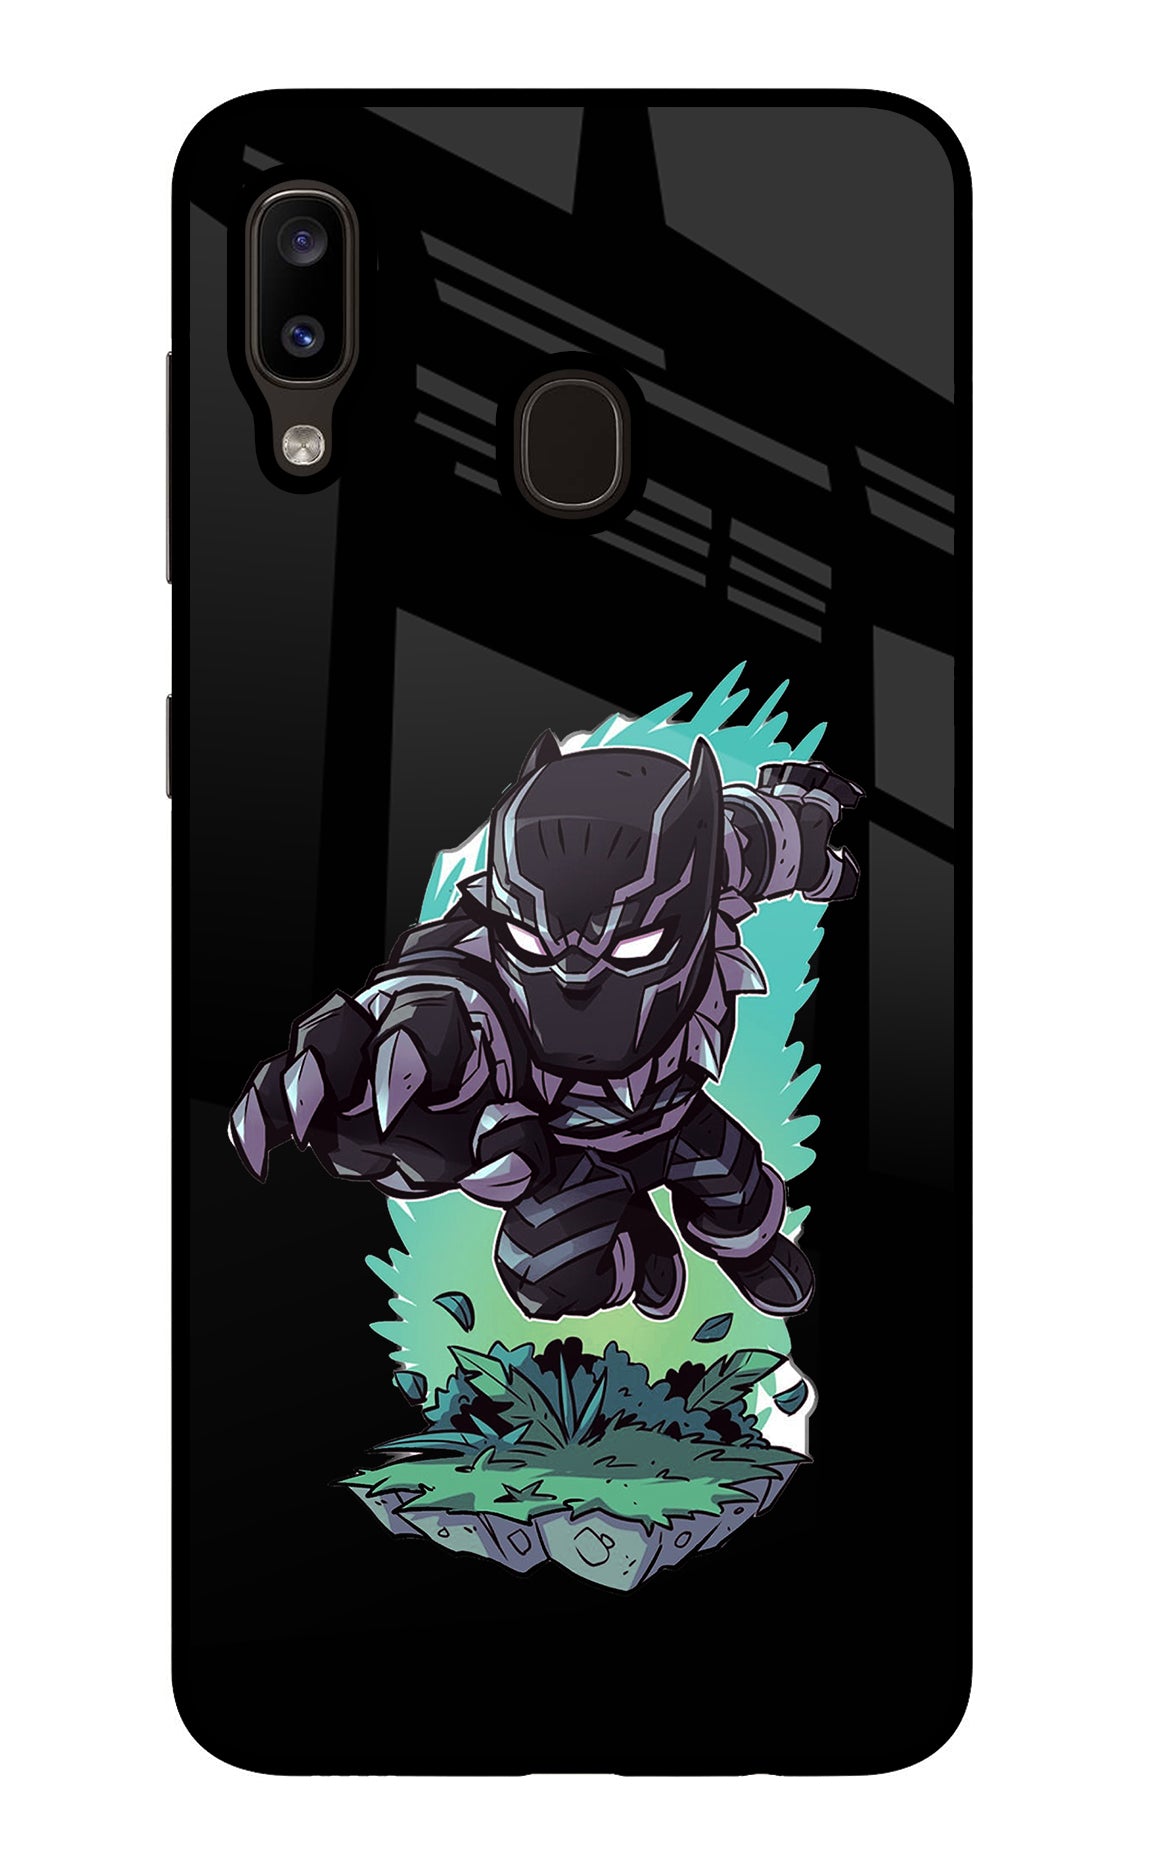 Black Panther Samsung A20/M10s Back Cover